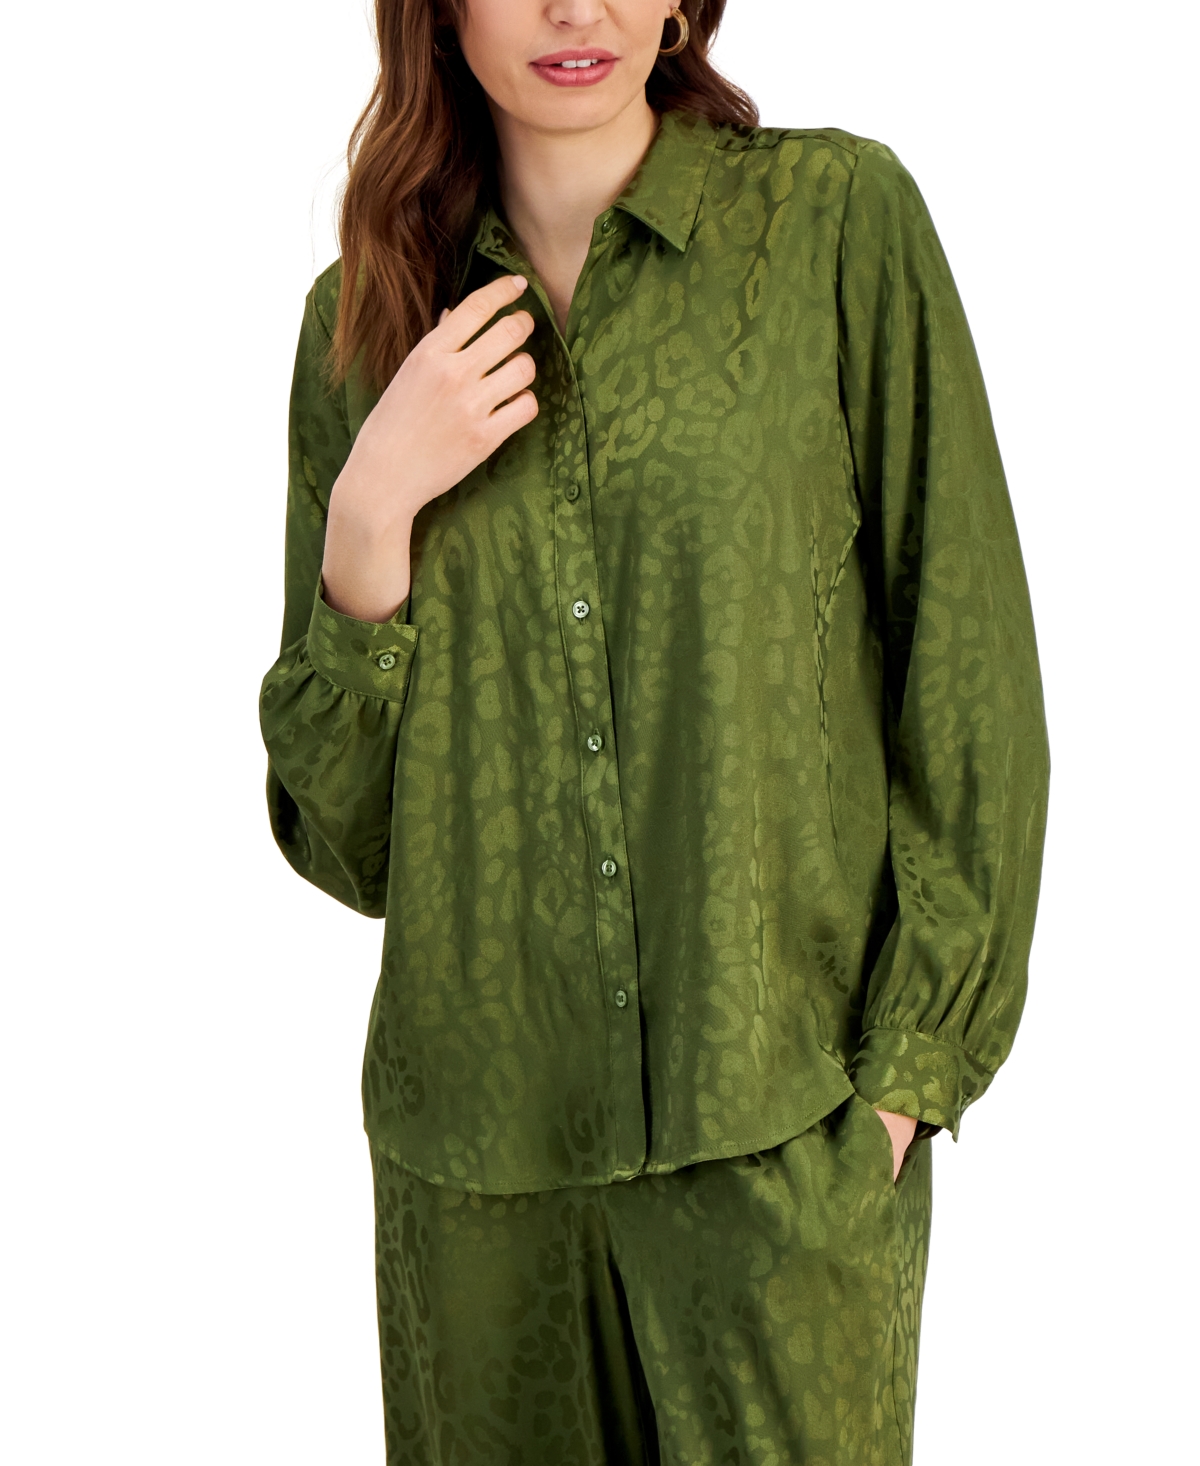 Women's Satin Long Sleeve Button-Front Shirt, Created for Macy's - New Avocado